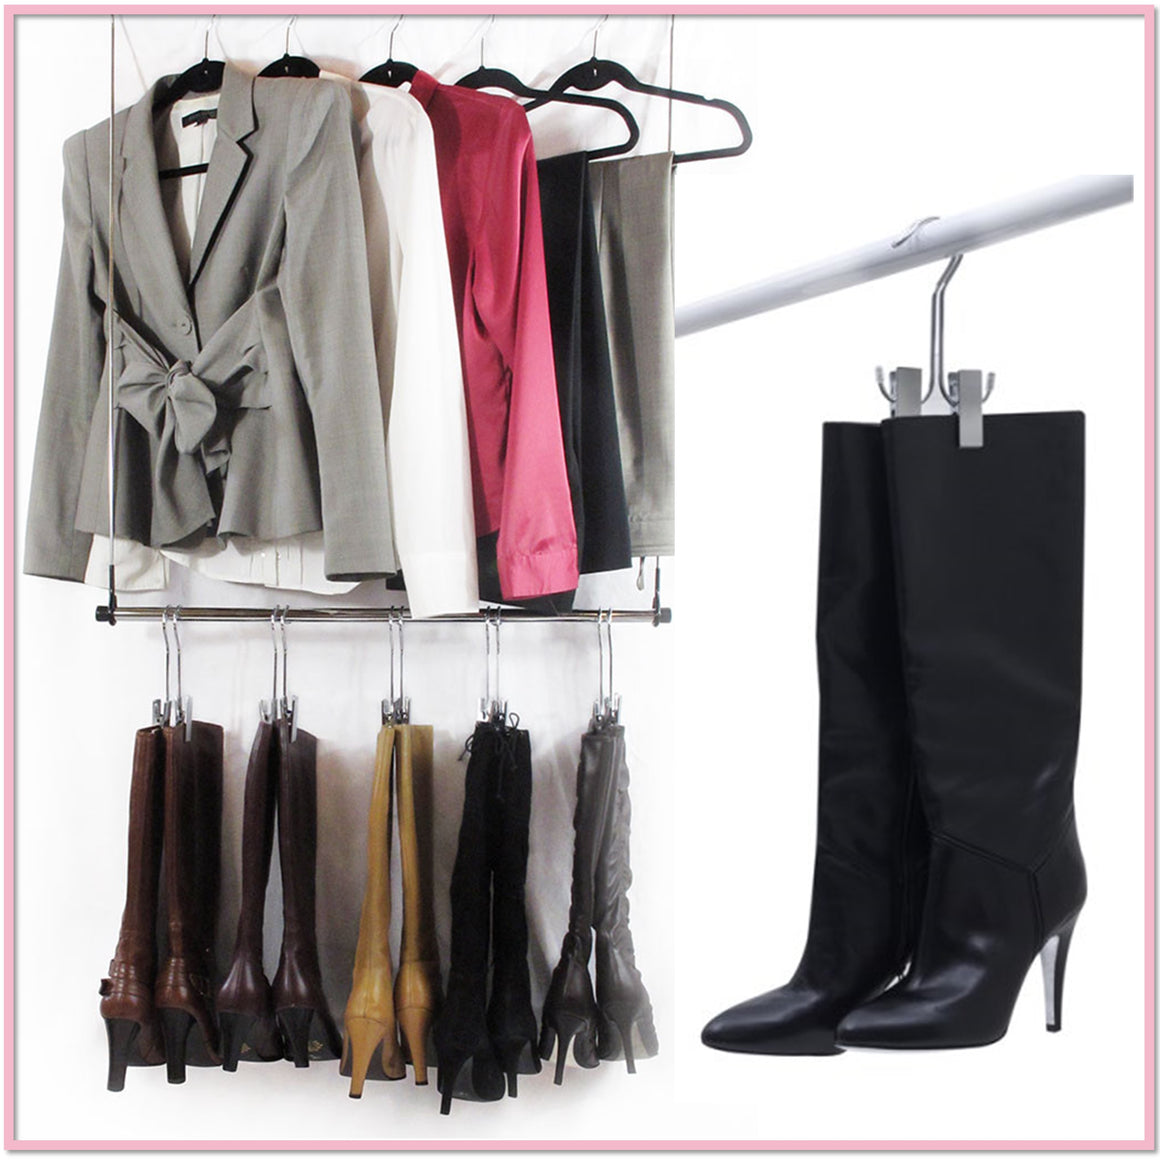 The Hanging Boot Rack™ - Boottique